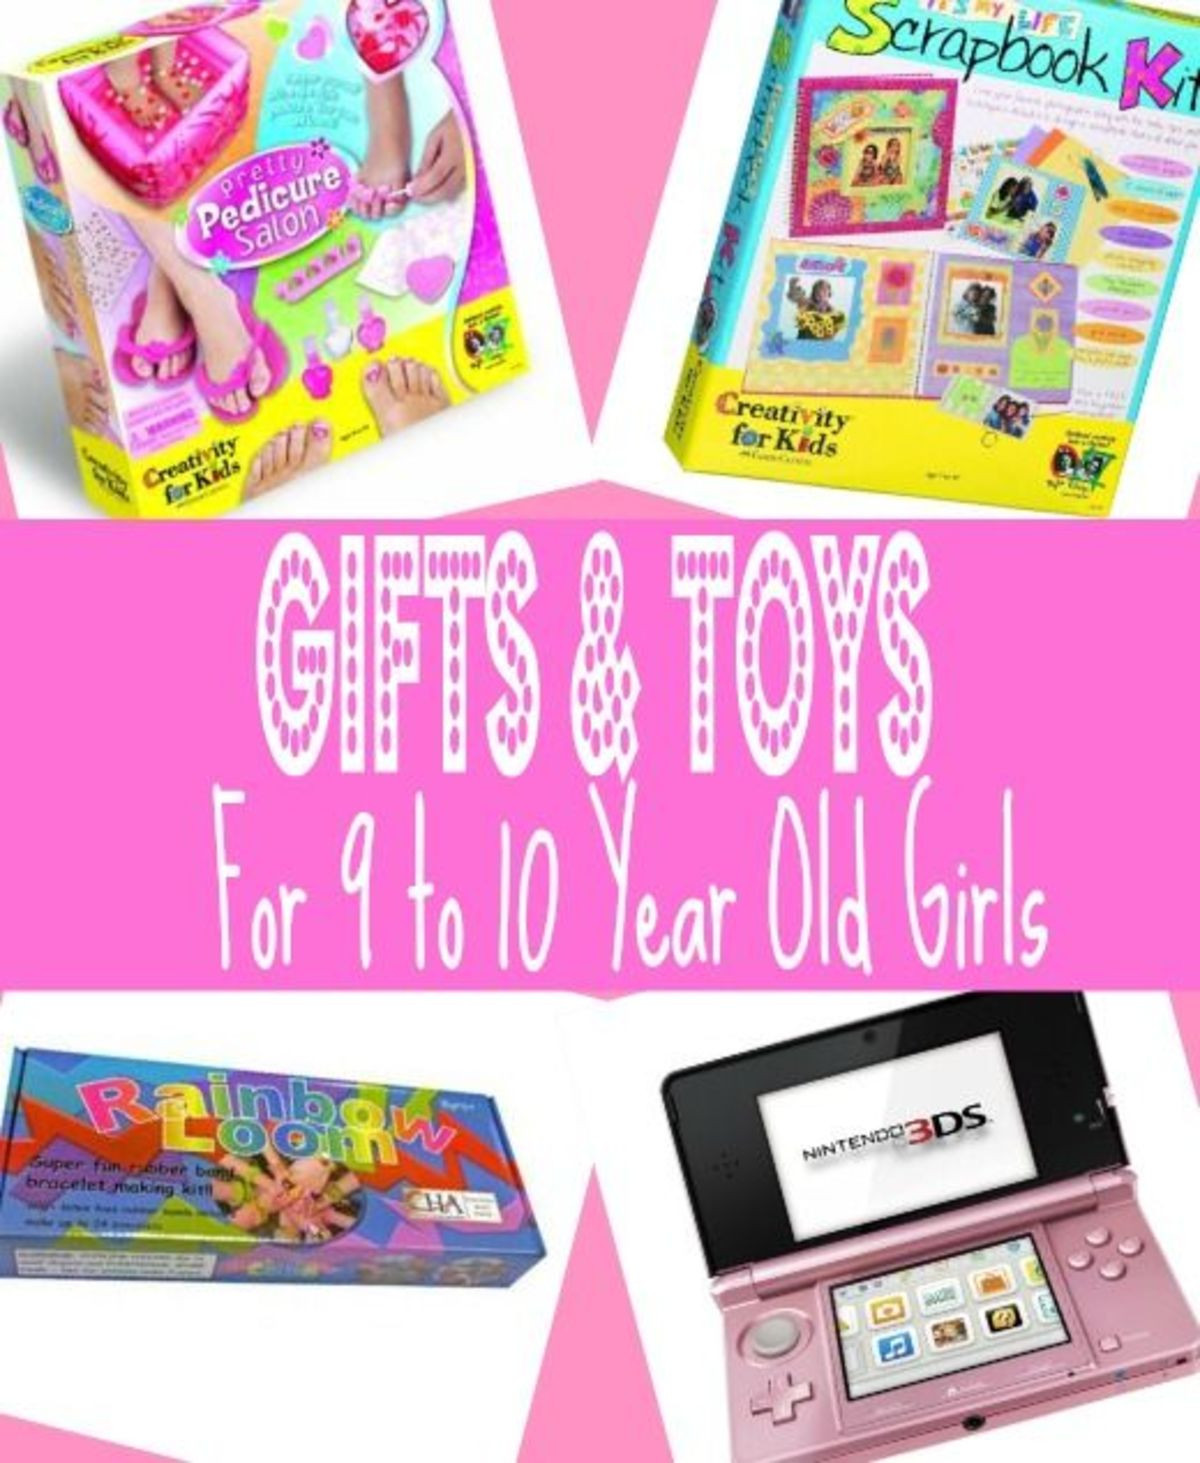 Birthday Gift Ideas For 9 Year Old Girl
 Best Unique Gift Ideas For A 9 Year Old Girl Reviews And